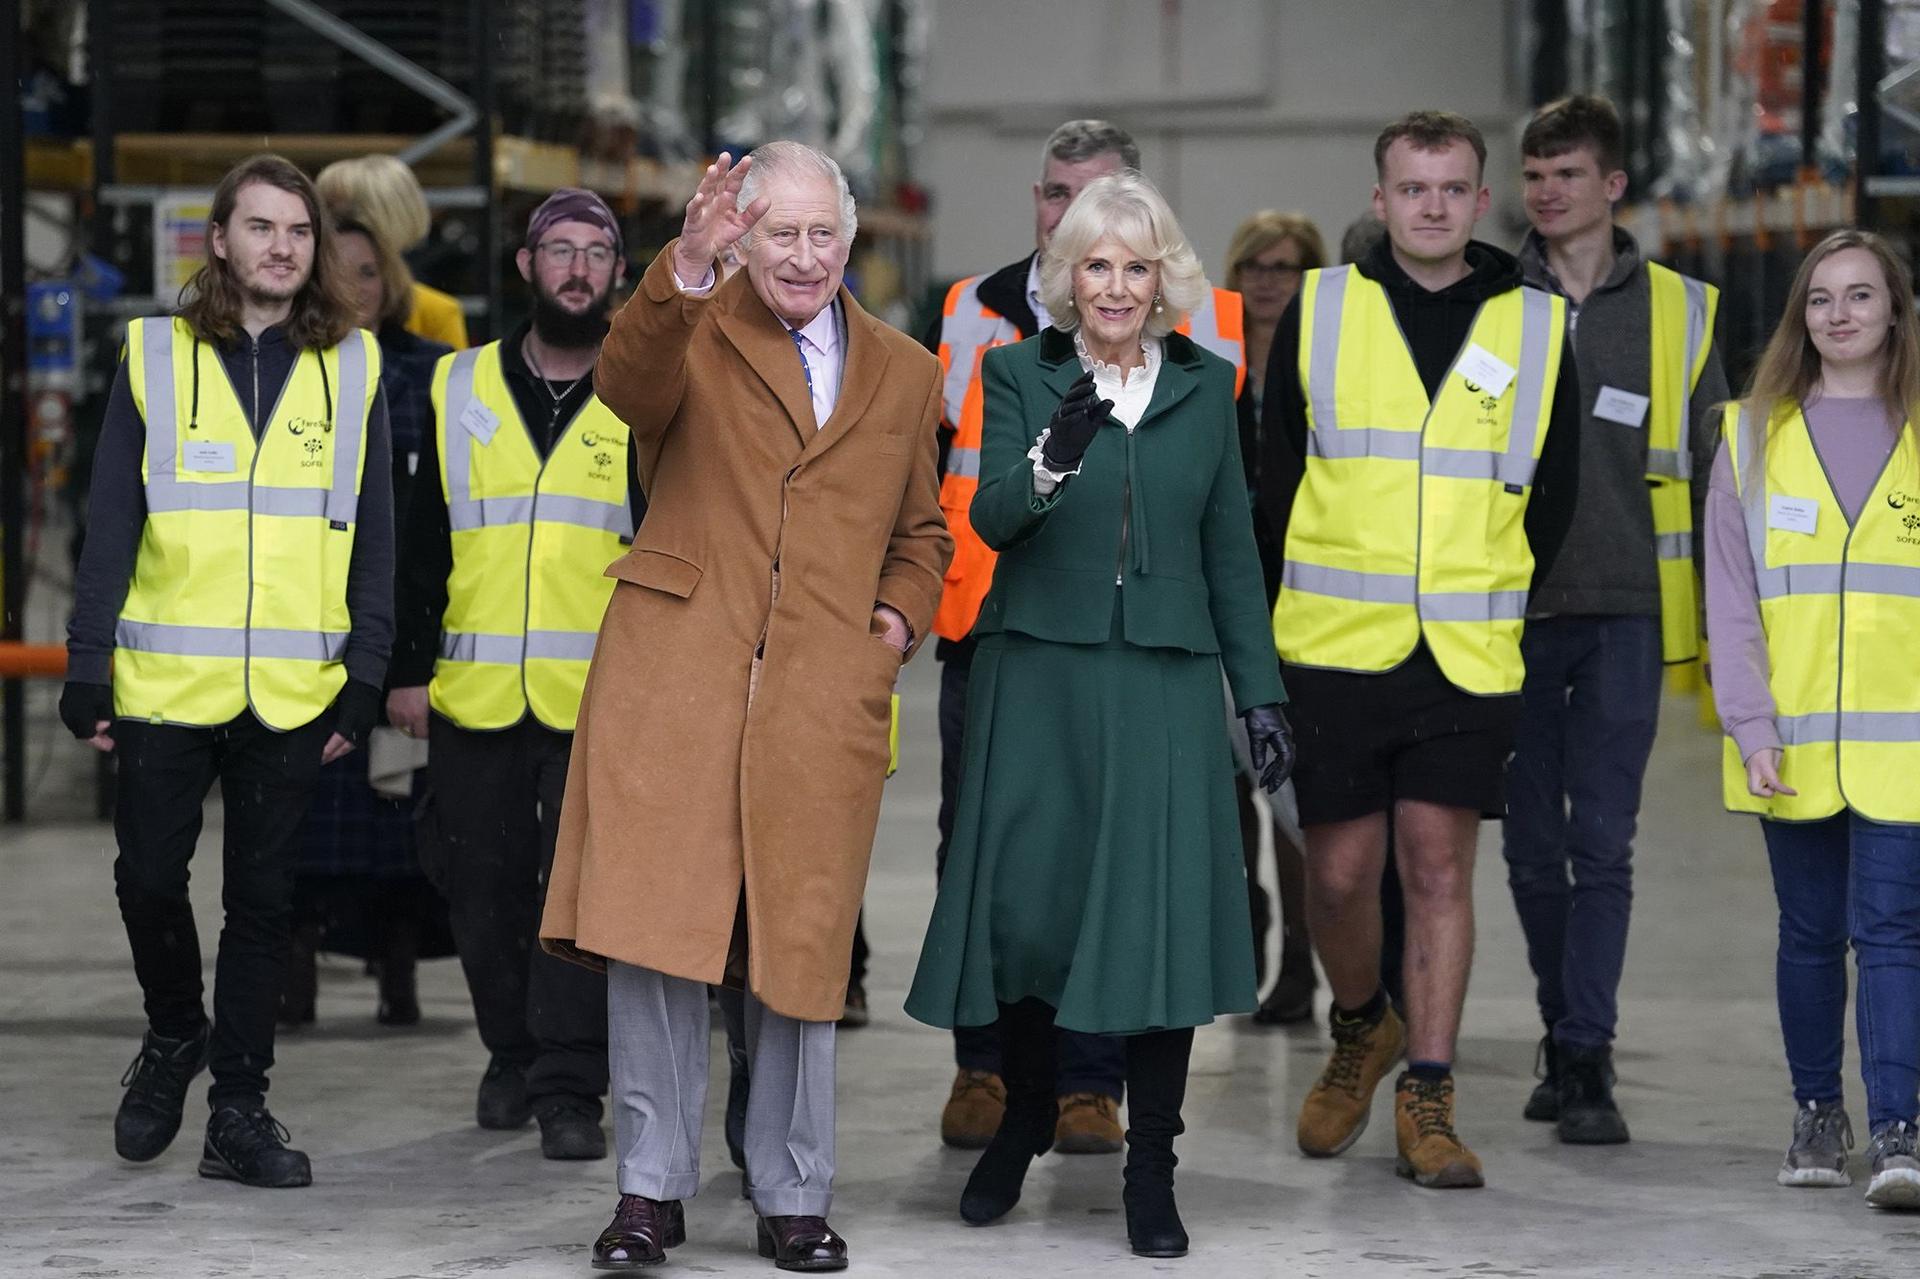 Charles III and Camilla arrive to mark the King's 75th birthday at the official launch of The Coronation Food Project, which aims to bridge the gap between food waste and food need across all four nations of the United Kingdom, at a surplus food distribution centre in Didcot, Oxfordshire. 